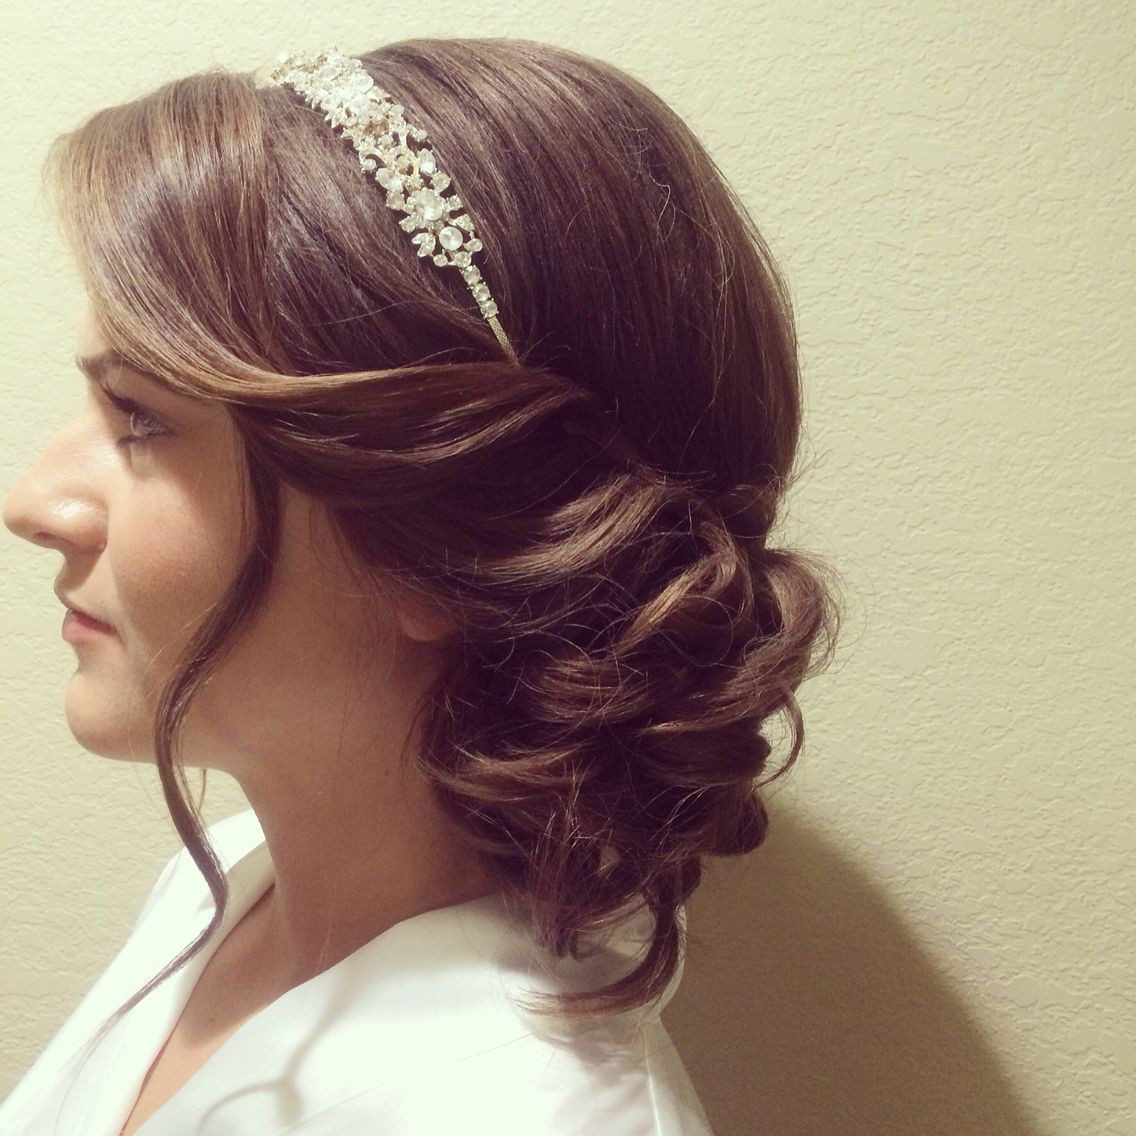 Side Buns Wedding Hairstyles
 Side bun bridal hairstyle with headband